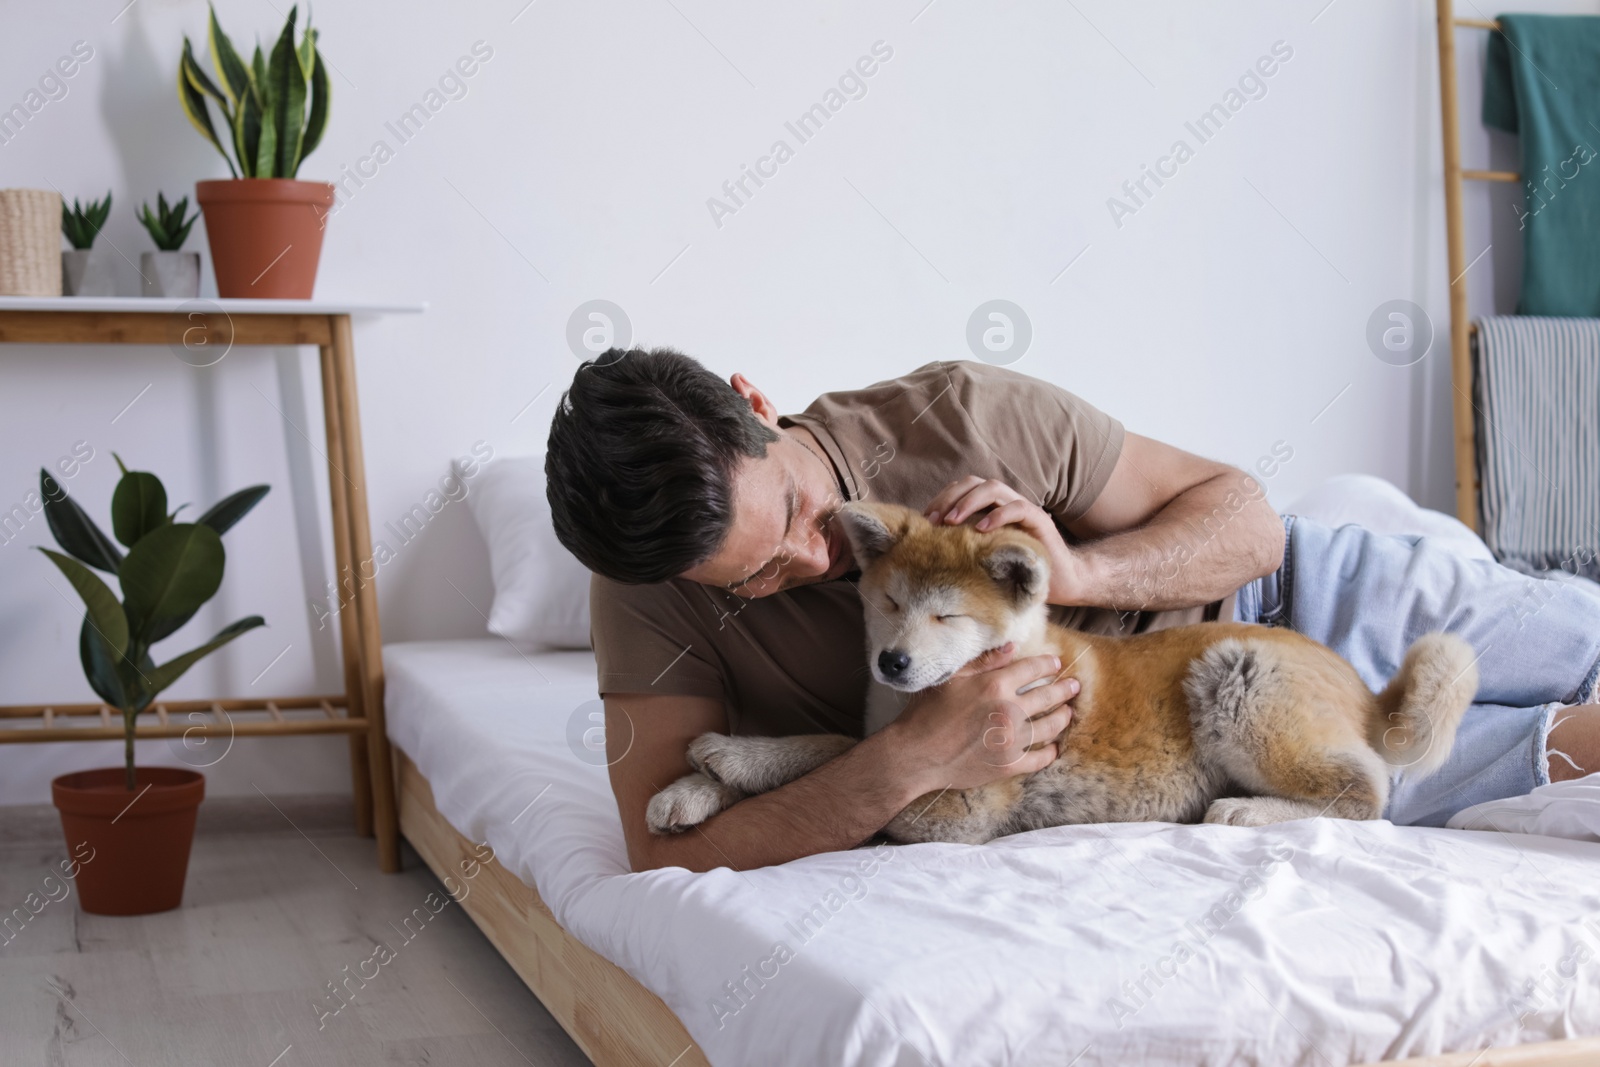 Photo of Man and Akita Inu dog in bedroom decorated with houseplants